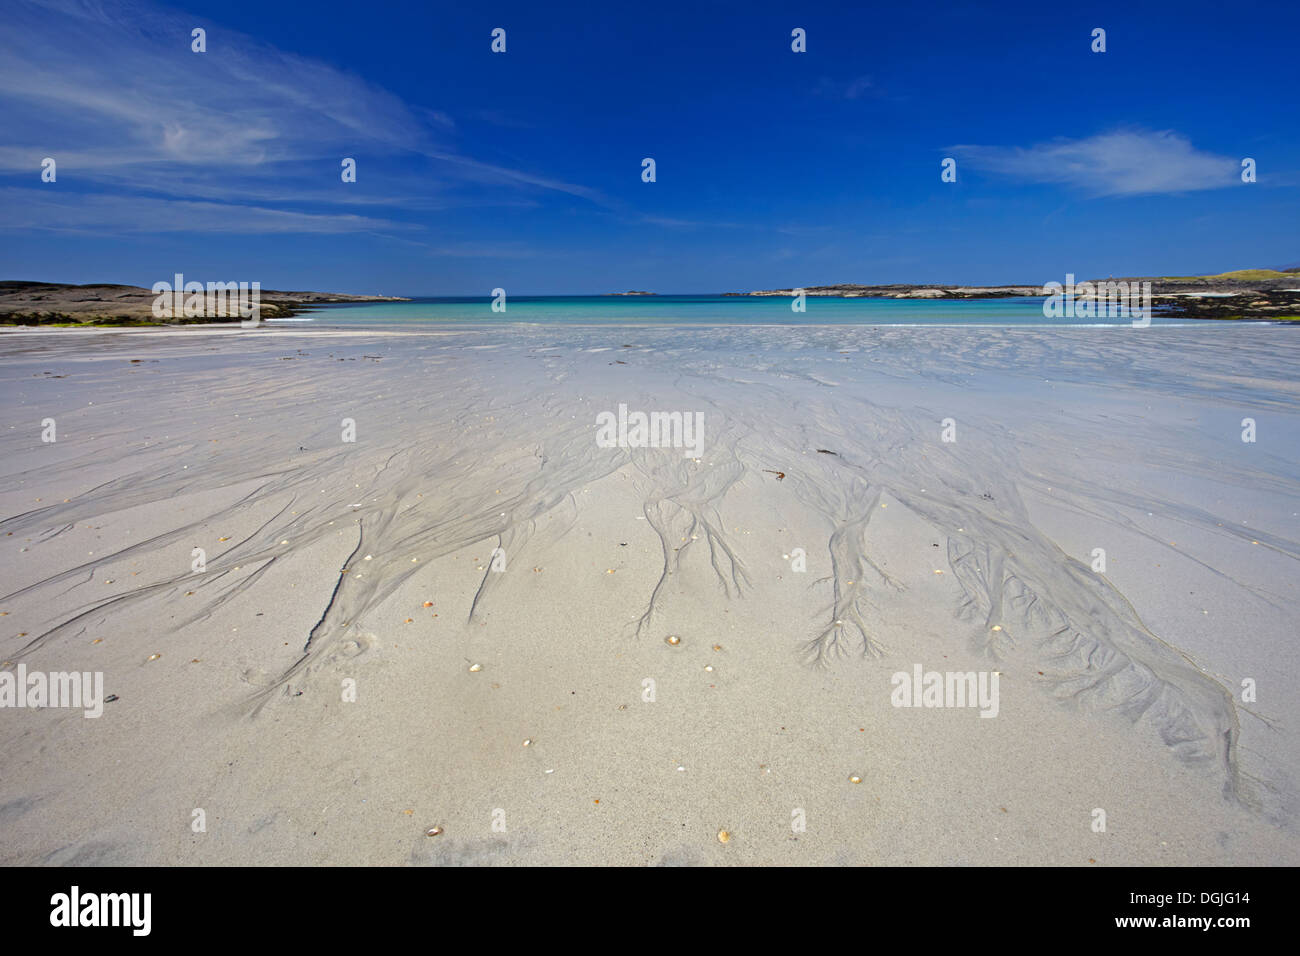 The beach and turquoise waters at Sanna Bay. Stock Photo